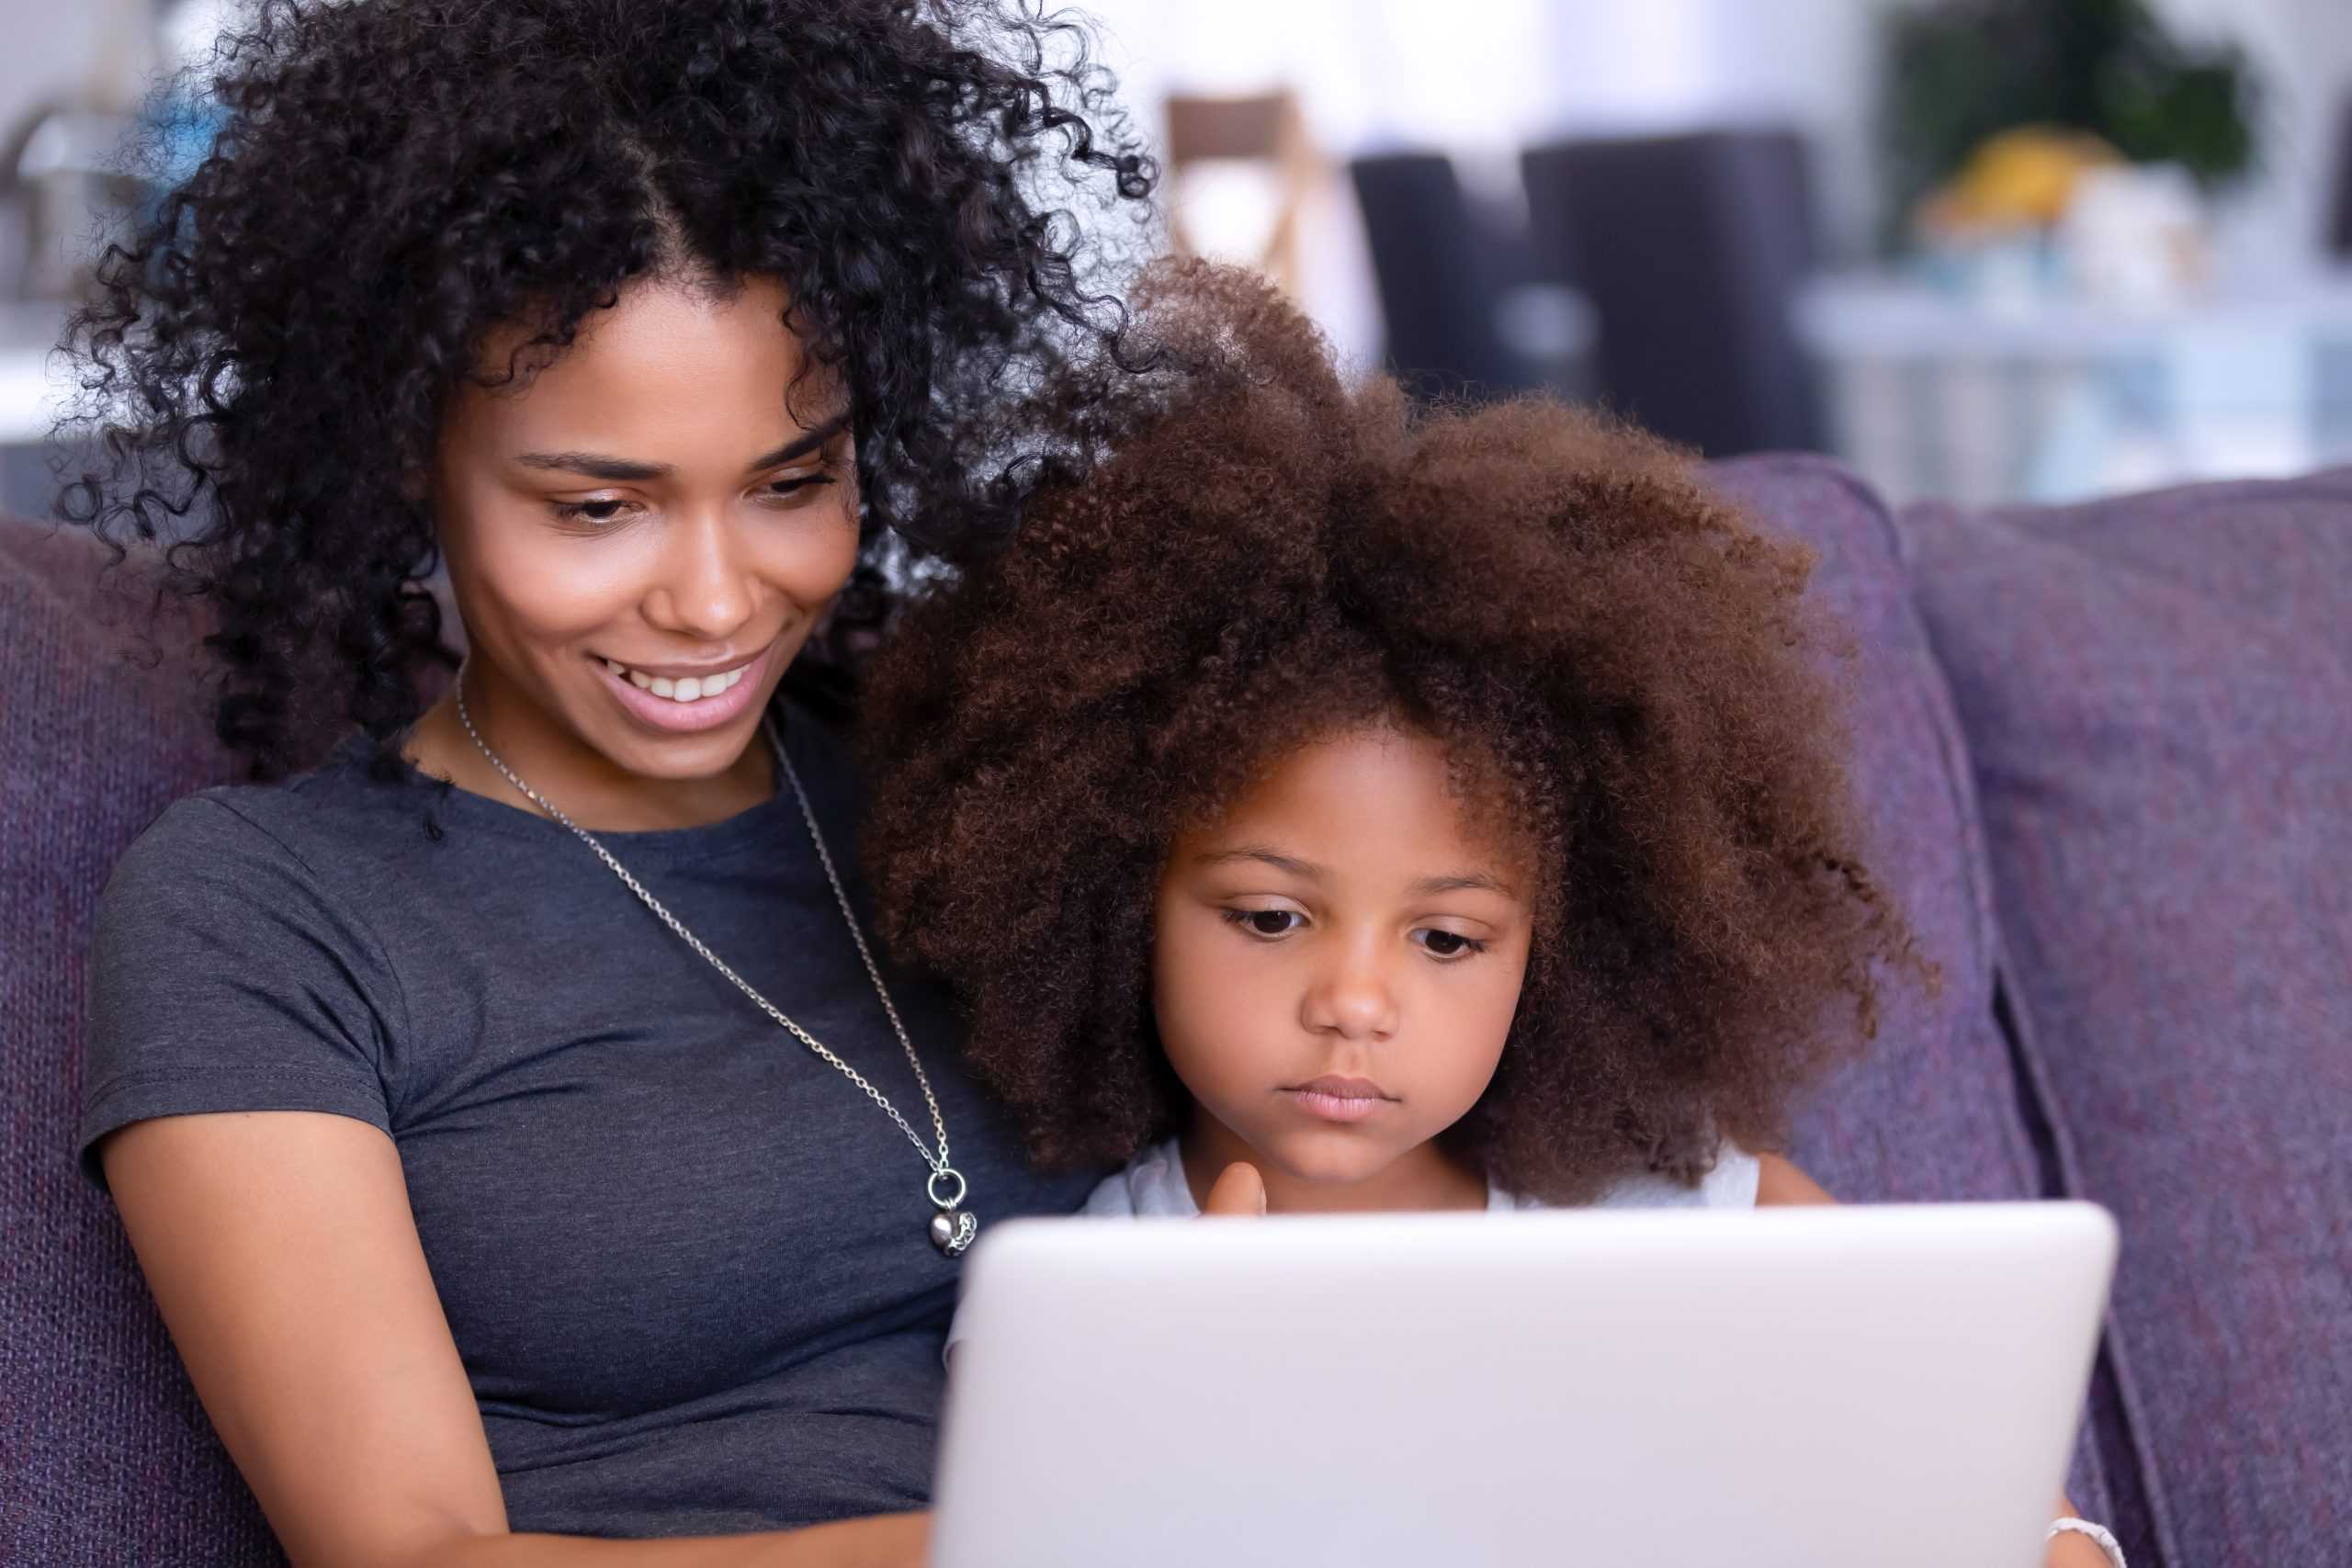 A mother and her young daughter sitting on a sofa looking at a computer.